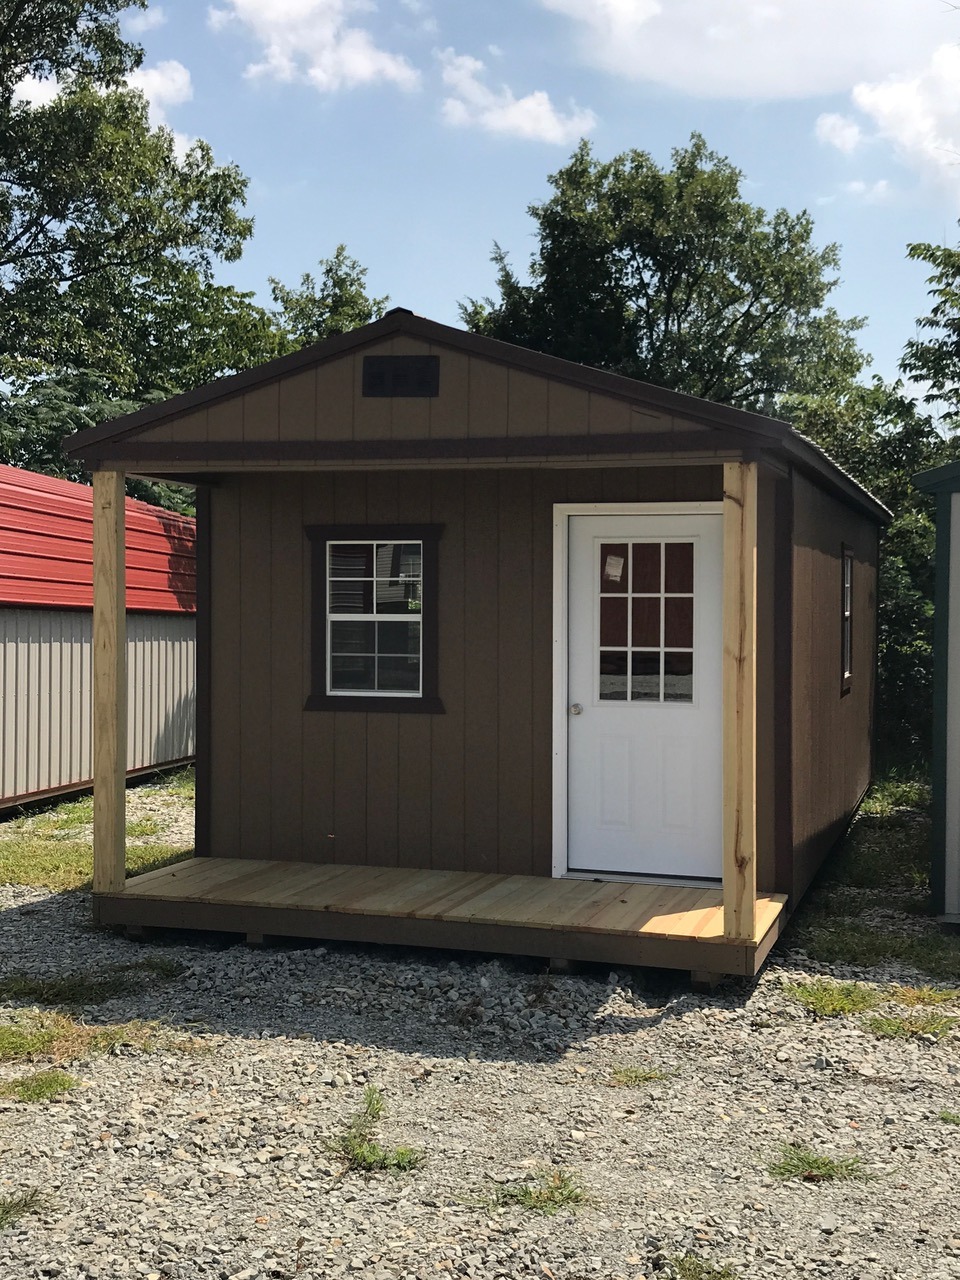 Brown express series cabin with black trim and white door